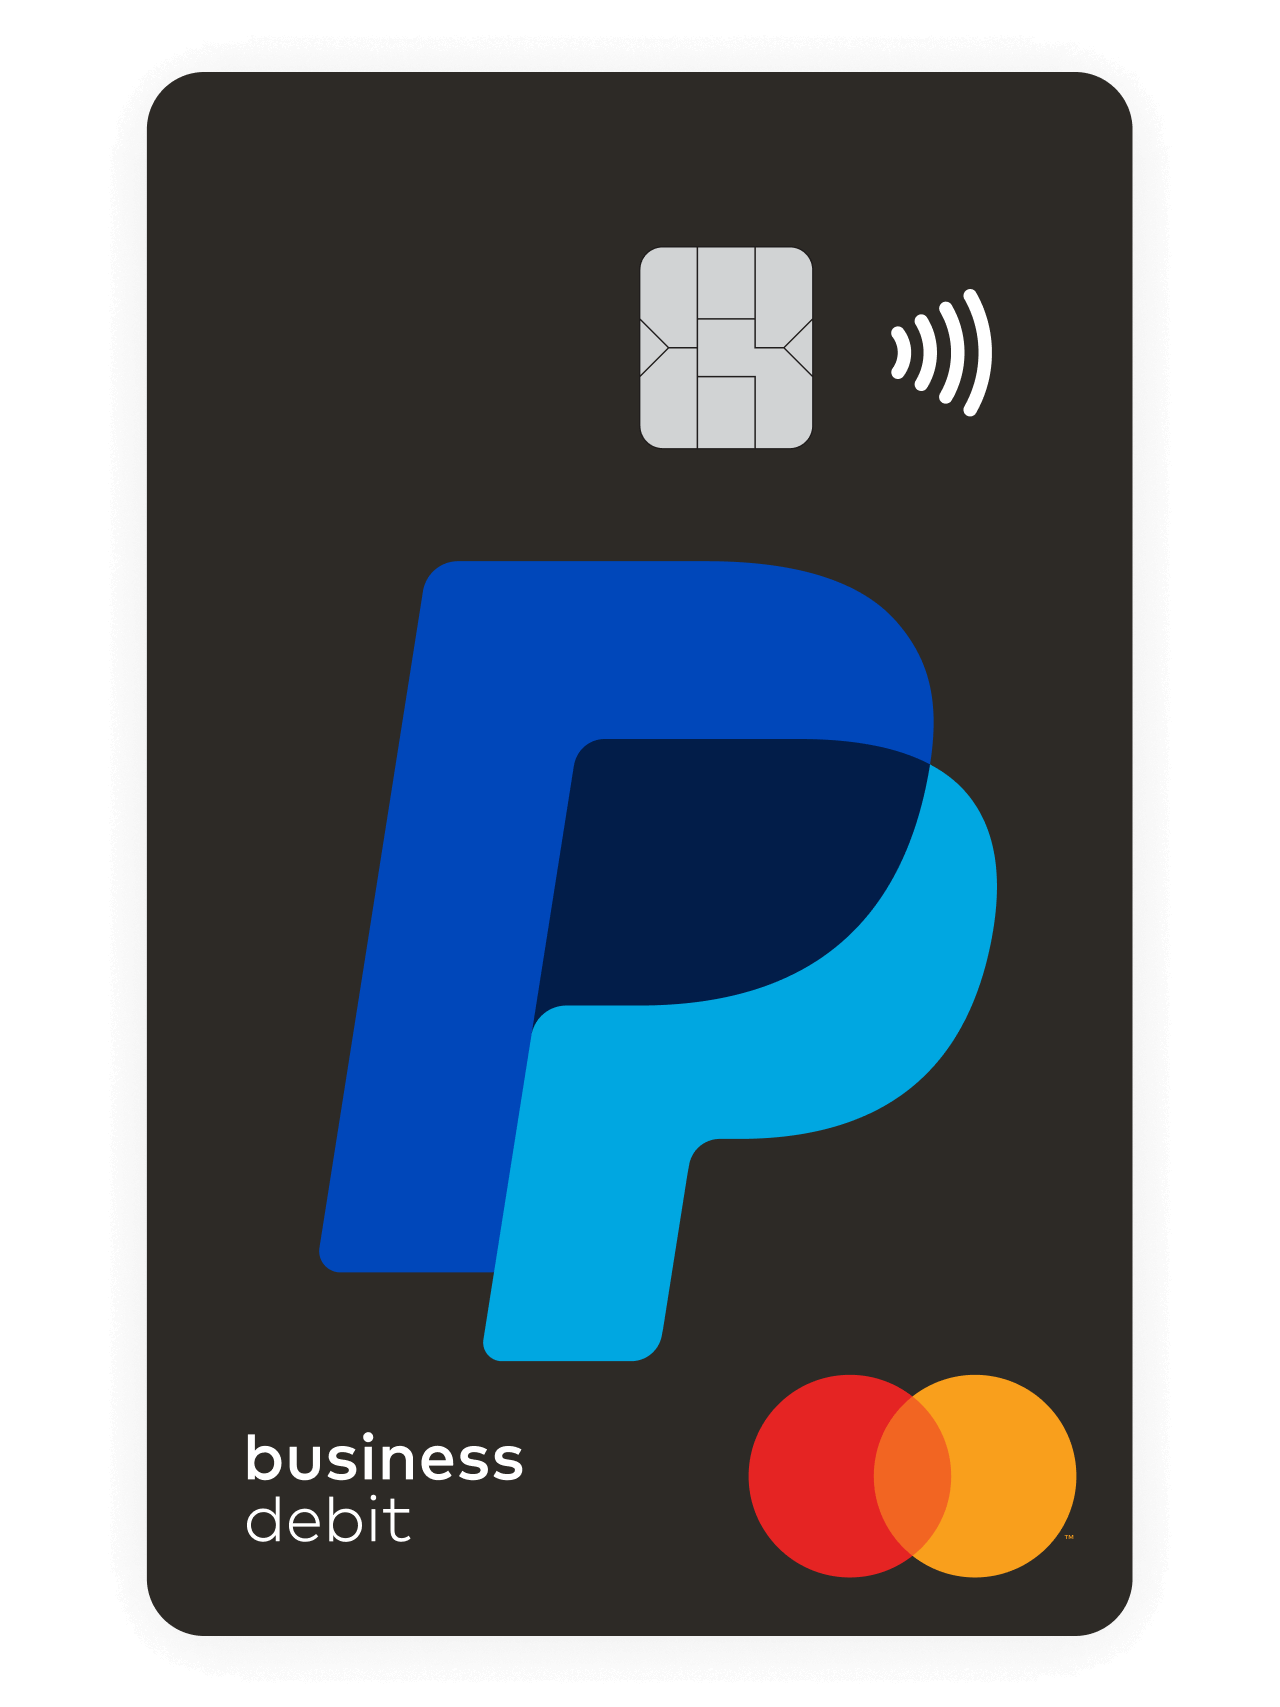 PayPal Cashback Mastercard® review: Easy cash back but limited benefits